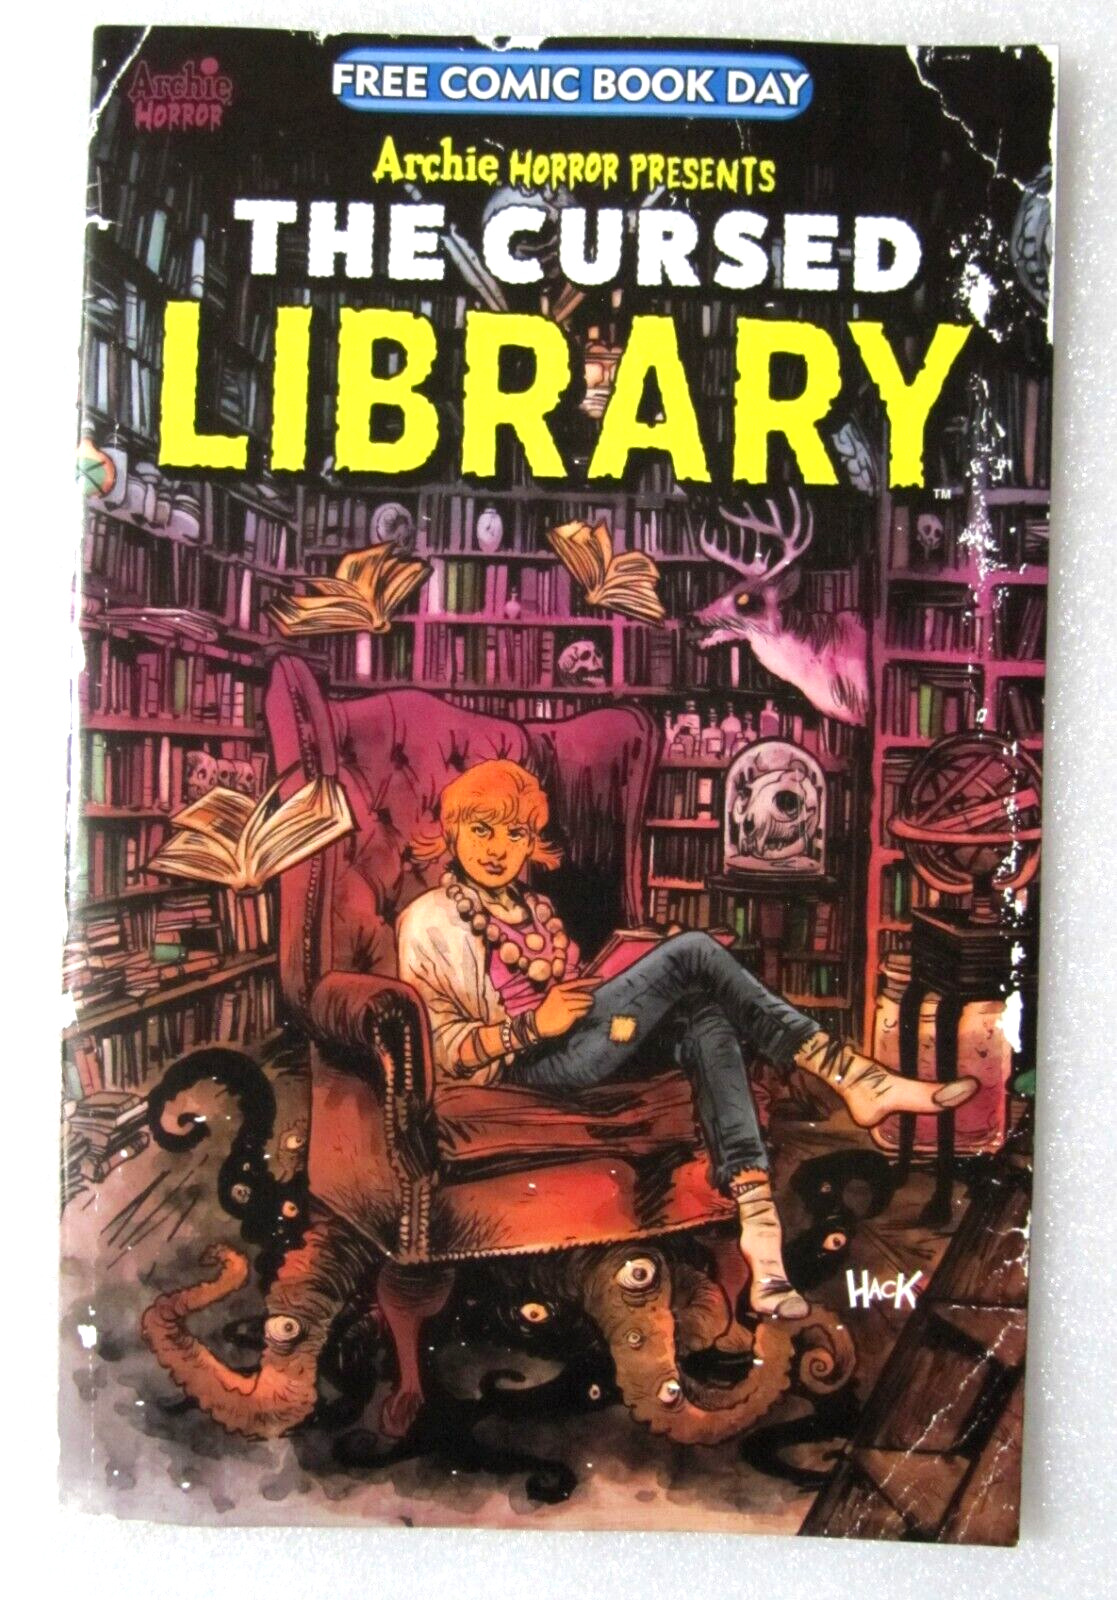 FCBD COMIC  THE CURSED LIBRARY #1 2023 ARCHIE ONE SHOT - NEW - BAGGED